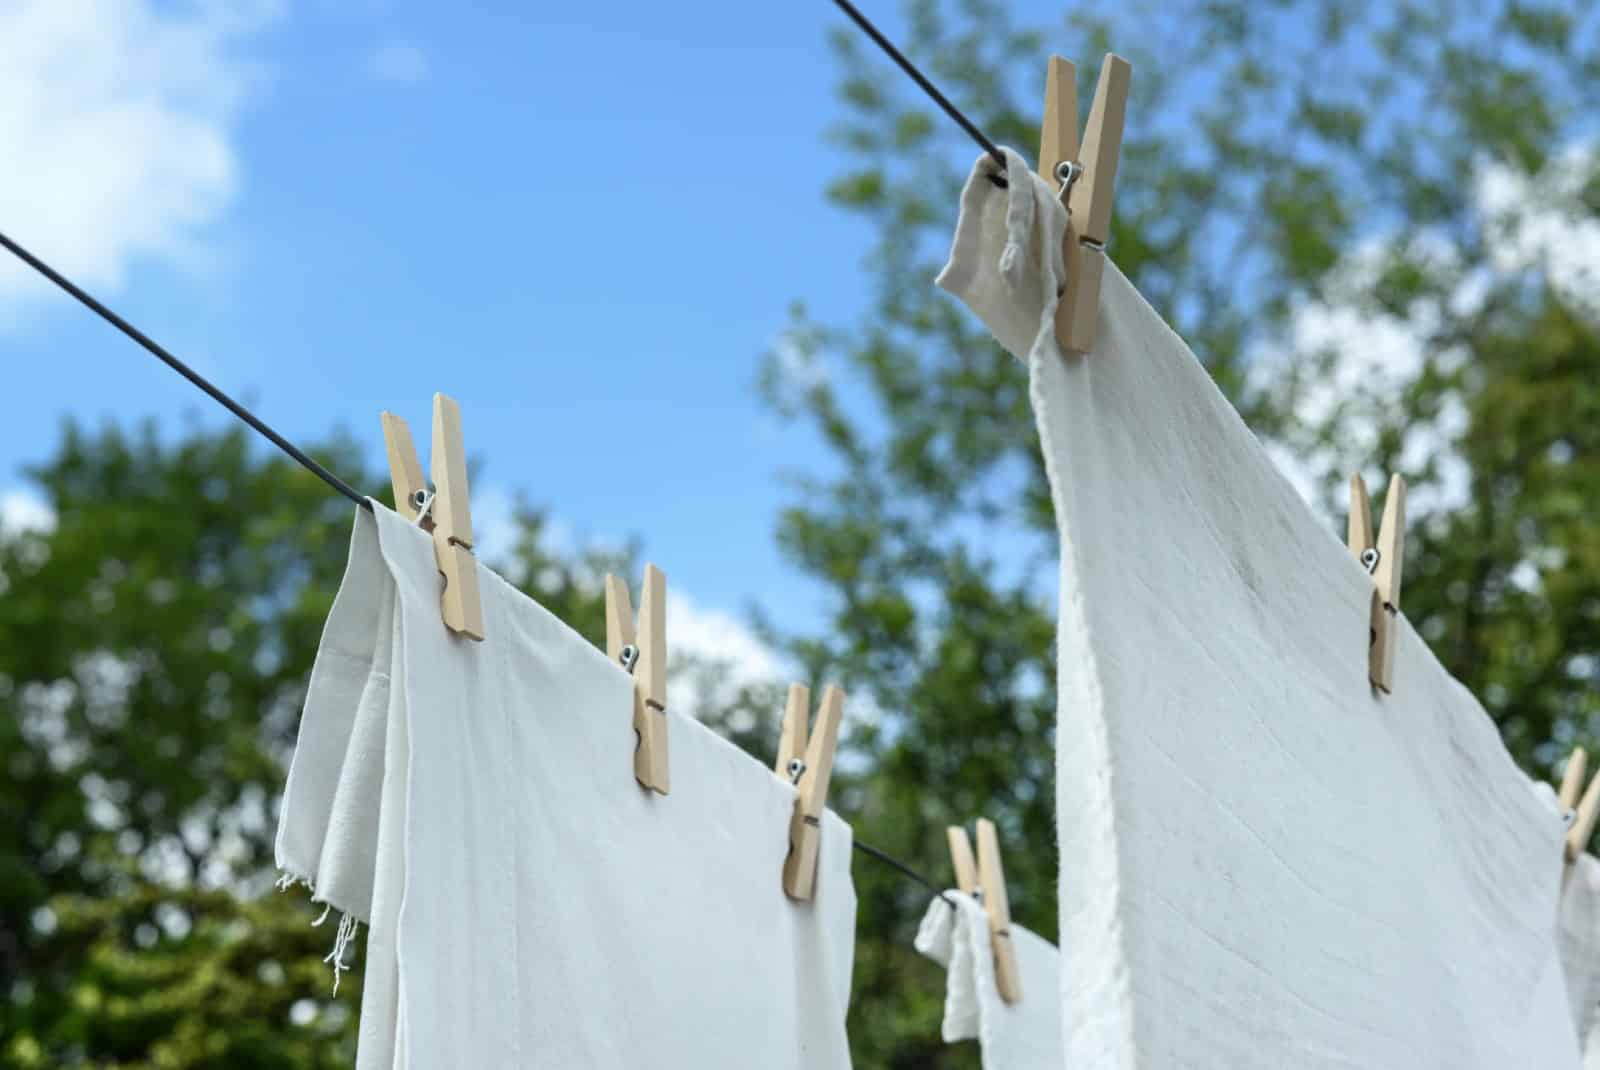 <p class="wp-caption-text">Image Credit: Pexels / Skitterphoto</p>  <p>Pack a small laundry bag to keep dirty clothes separate from clean ones. Include a travel-size laundry detergent to wash clothes on the go if necessary.</p>